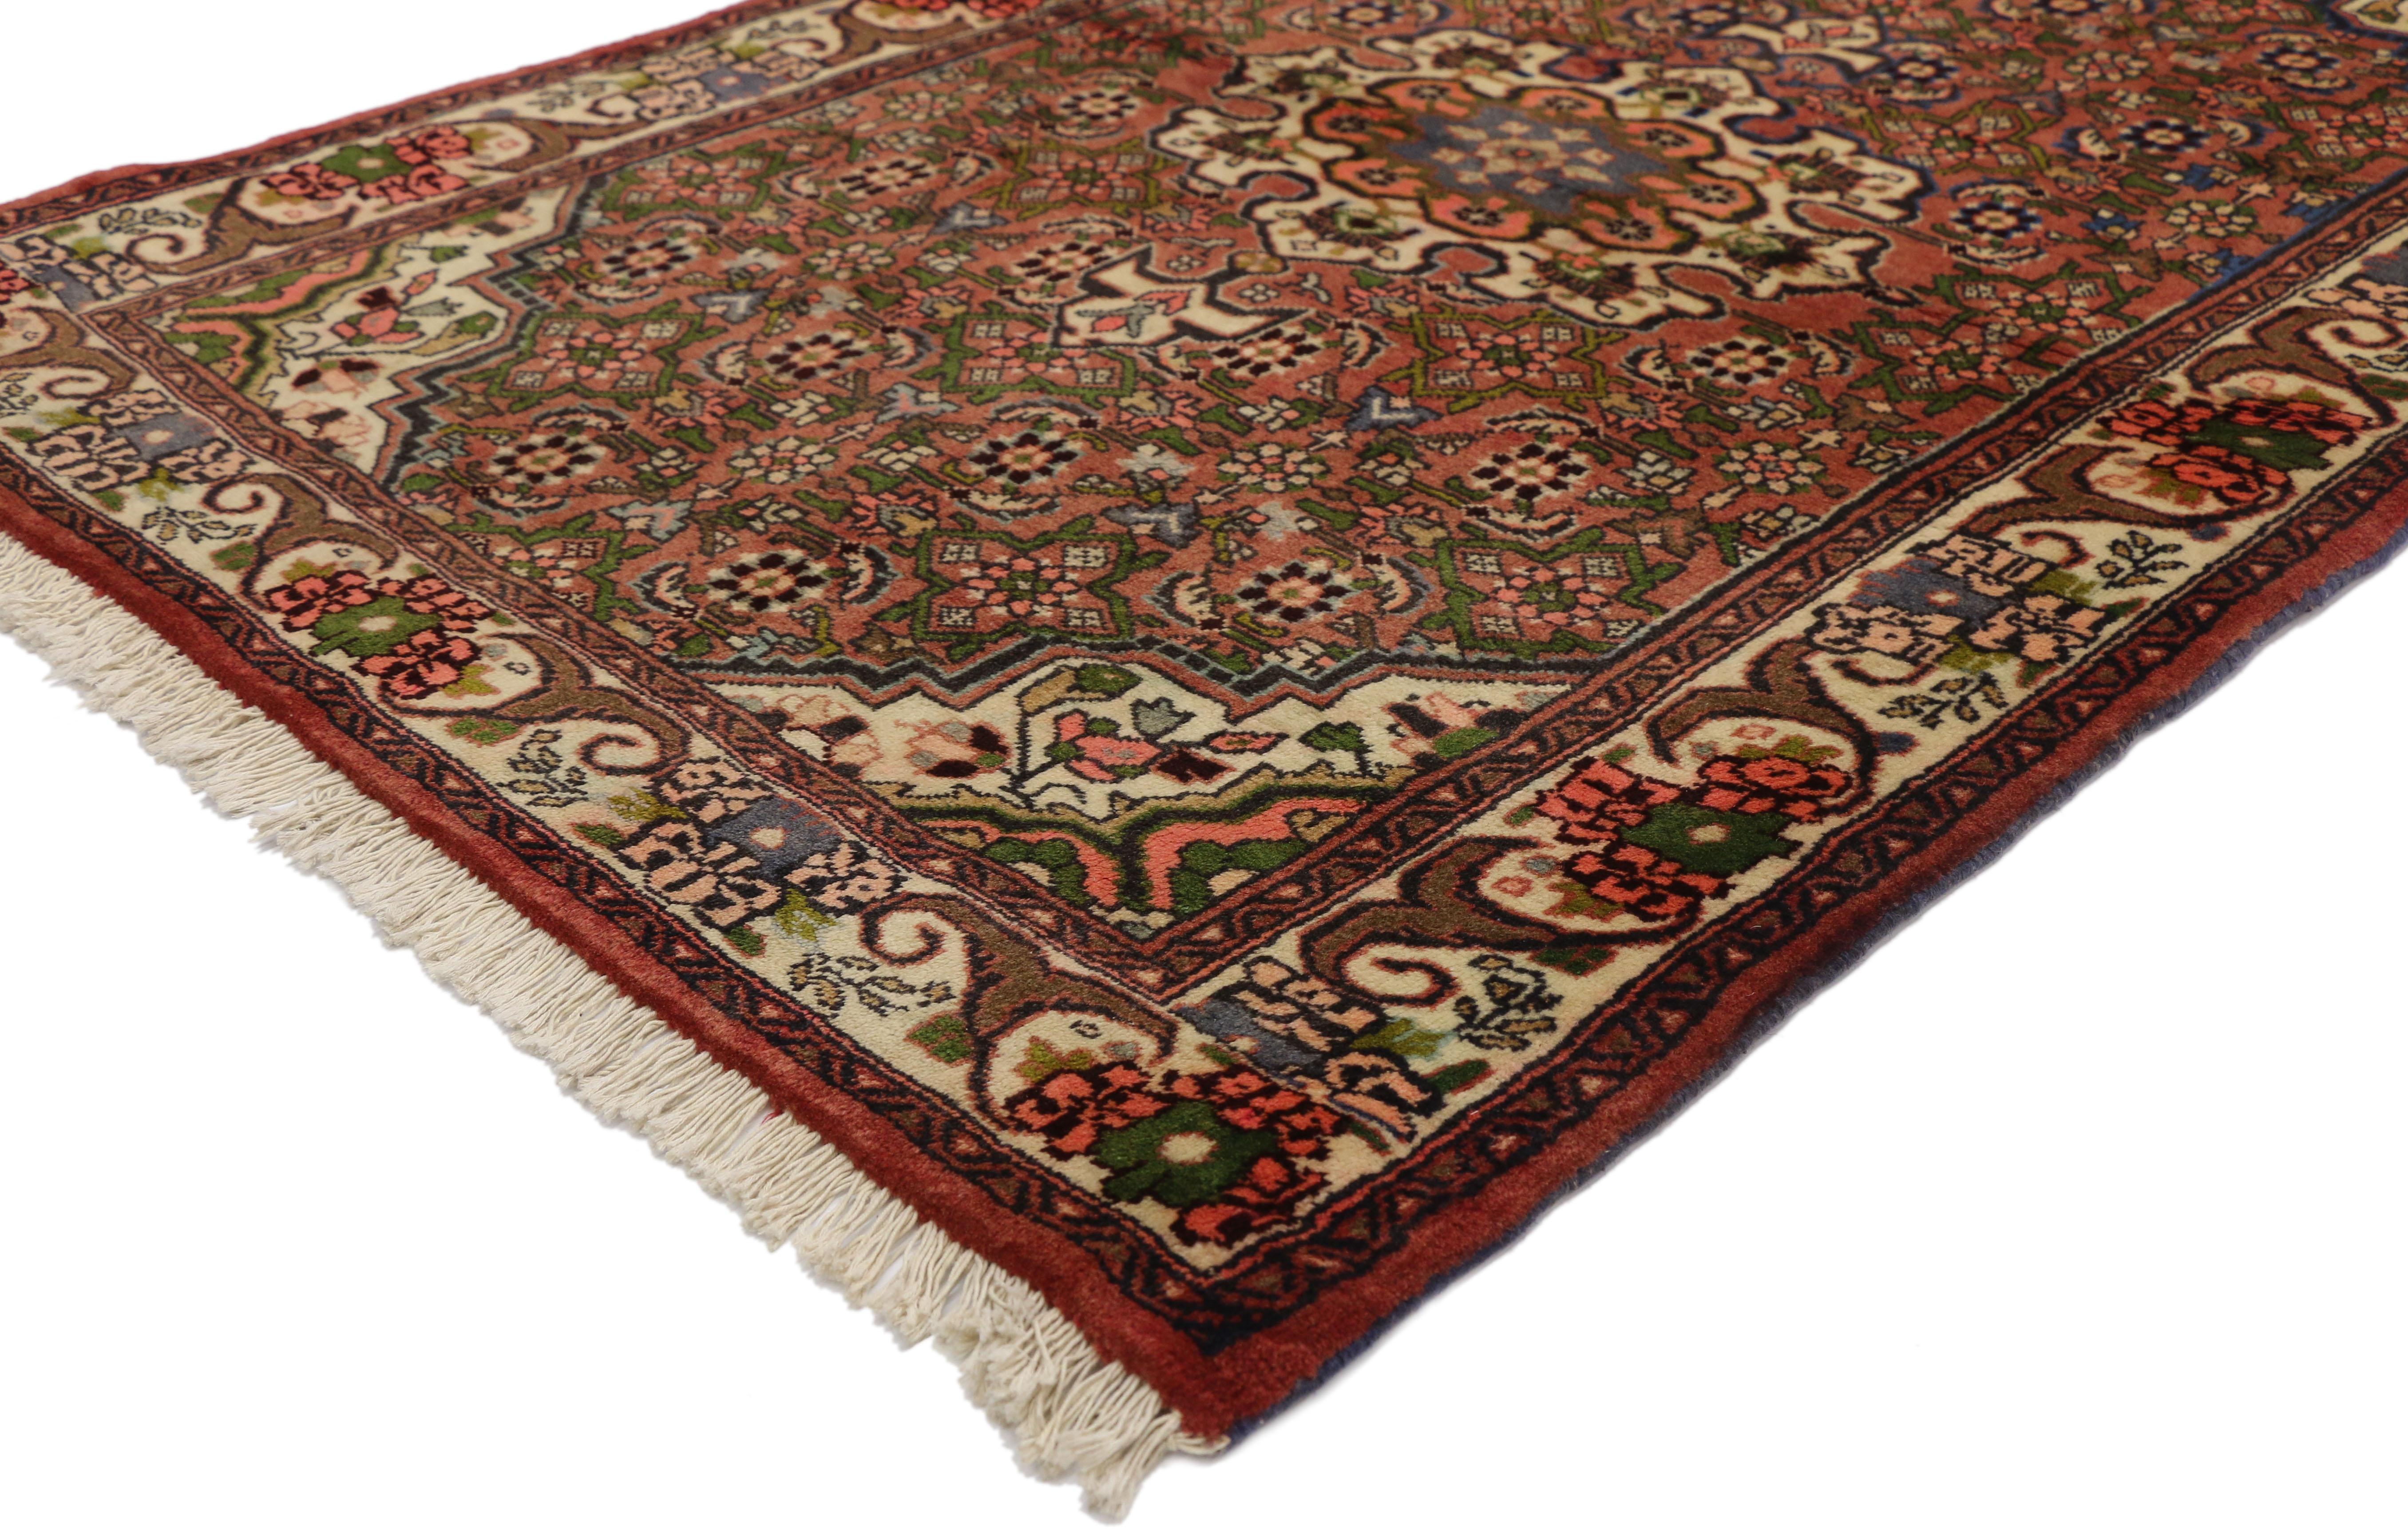 76057 Vintage Persian Borchelou Hamadan rug, Entry or Foyer rug. This hand knotted wool vintage Persian Borchelou Hamadan accent rug features a cusped round center medallion with anchor pendants surrounded by an all-over geometric floral pattern.